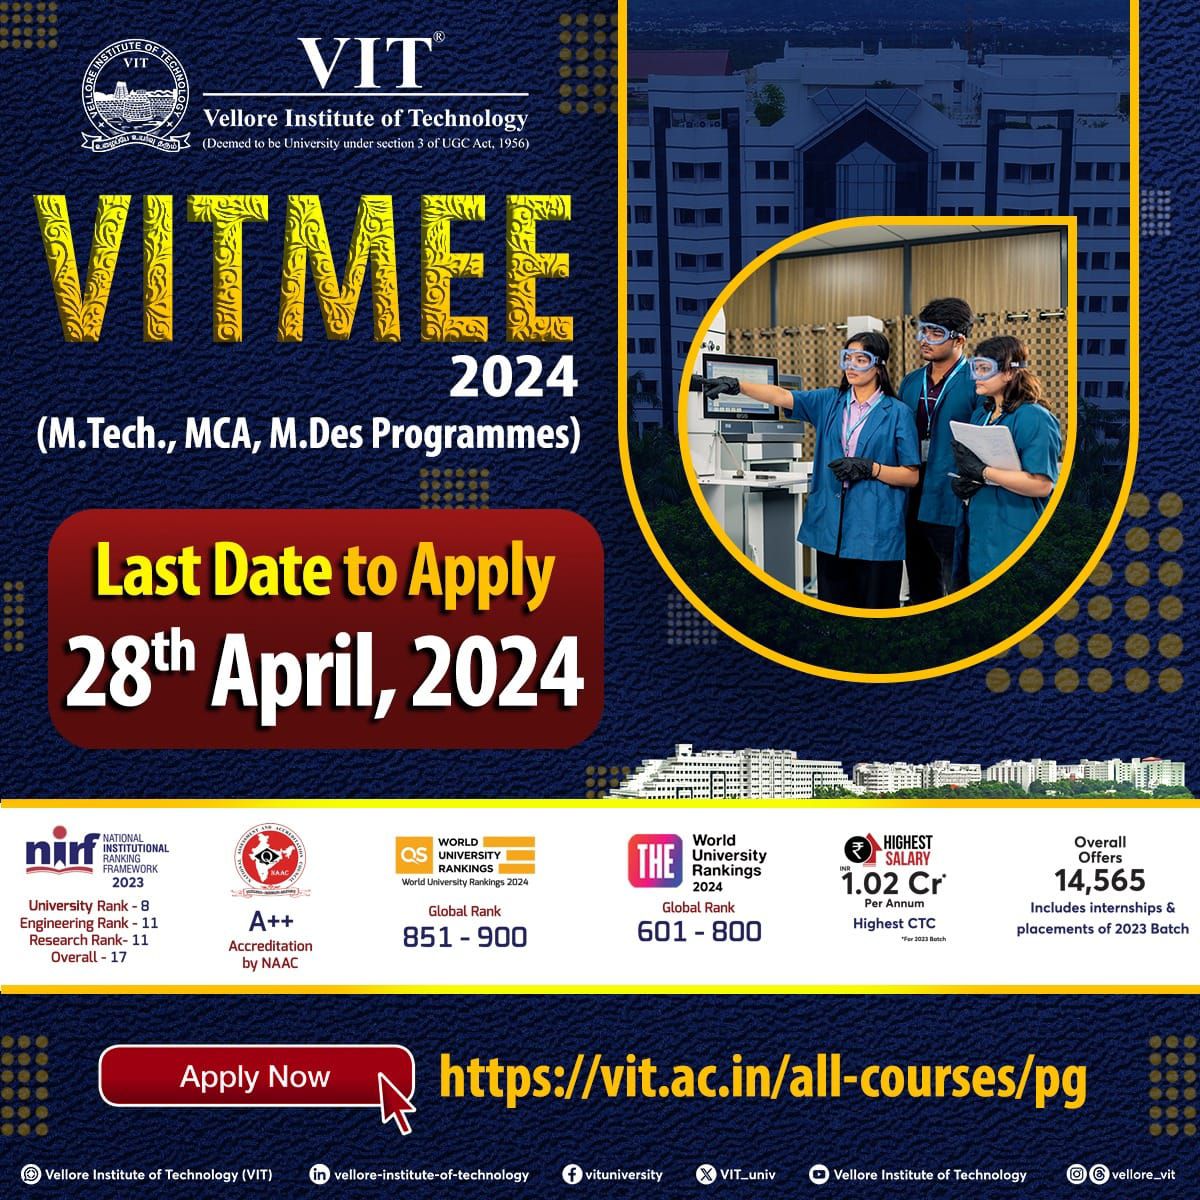 Unlock your potential and pursue your Master's degree with VIT!

Get ready to take the next step in your academic journey by applying for VITMEE @ vit.ac.in/all-courses/pg

Last Date to apply : April 28, 2024

#VIT #VITMEE #MastersDegree #MastersProgramme #VITEntranceExams